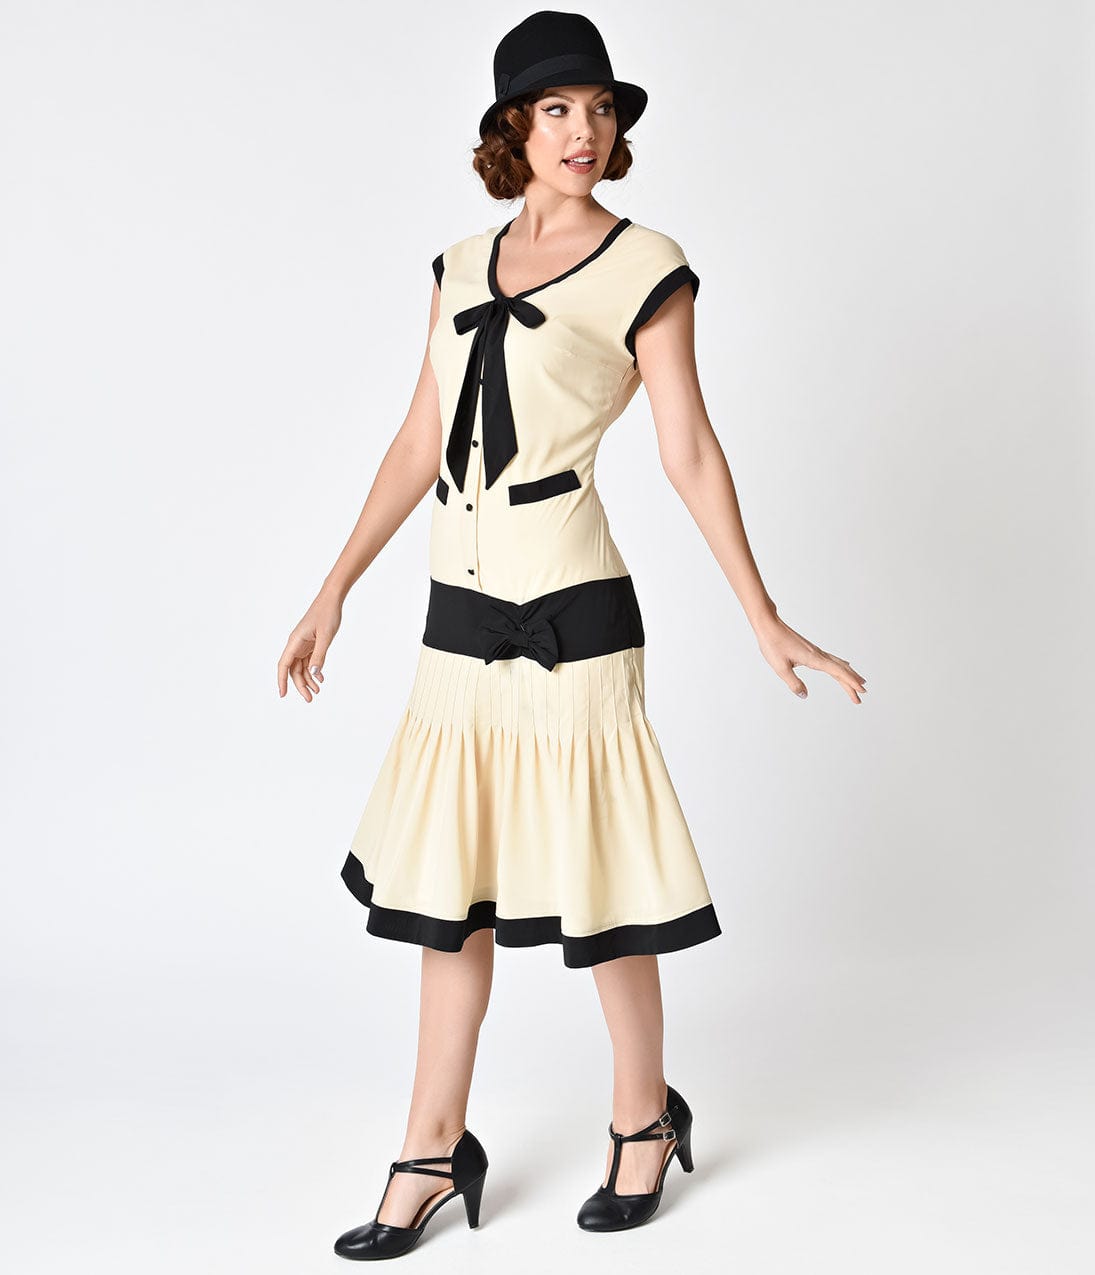 Great Gatsby Dress - Great Gatsby Dresses for Sale